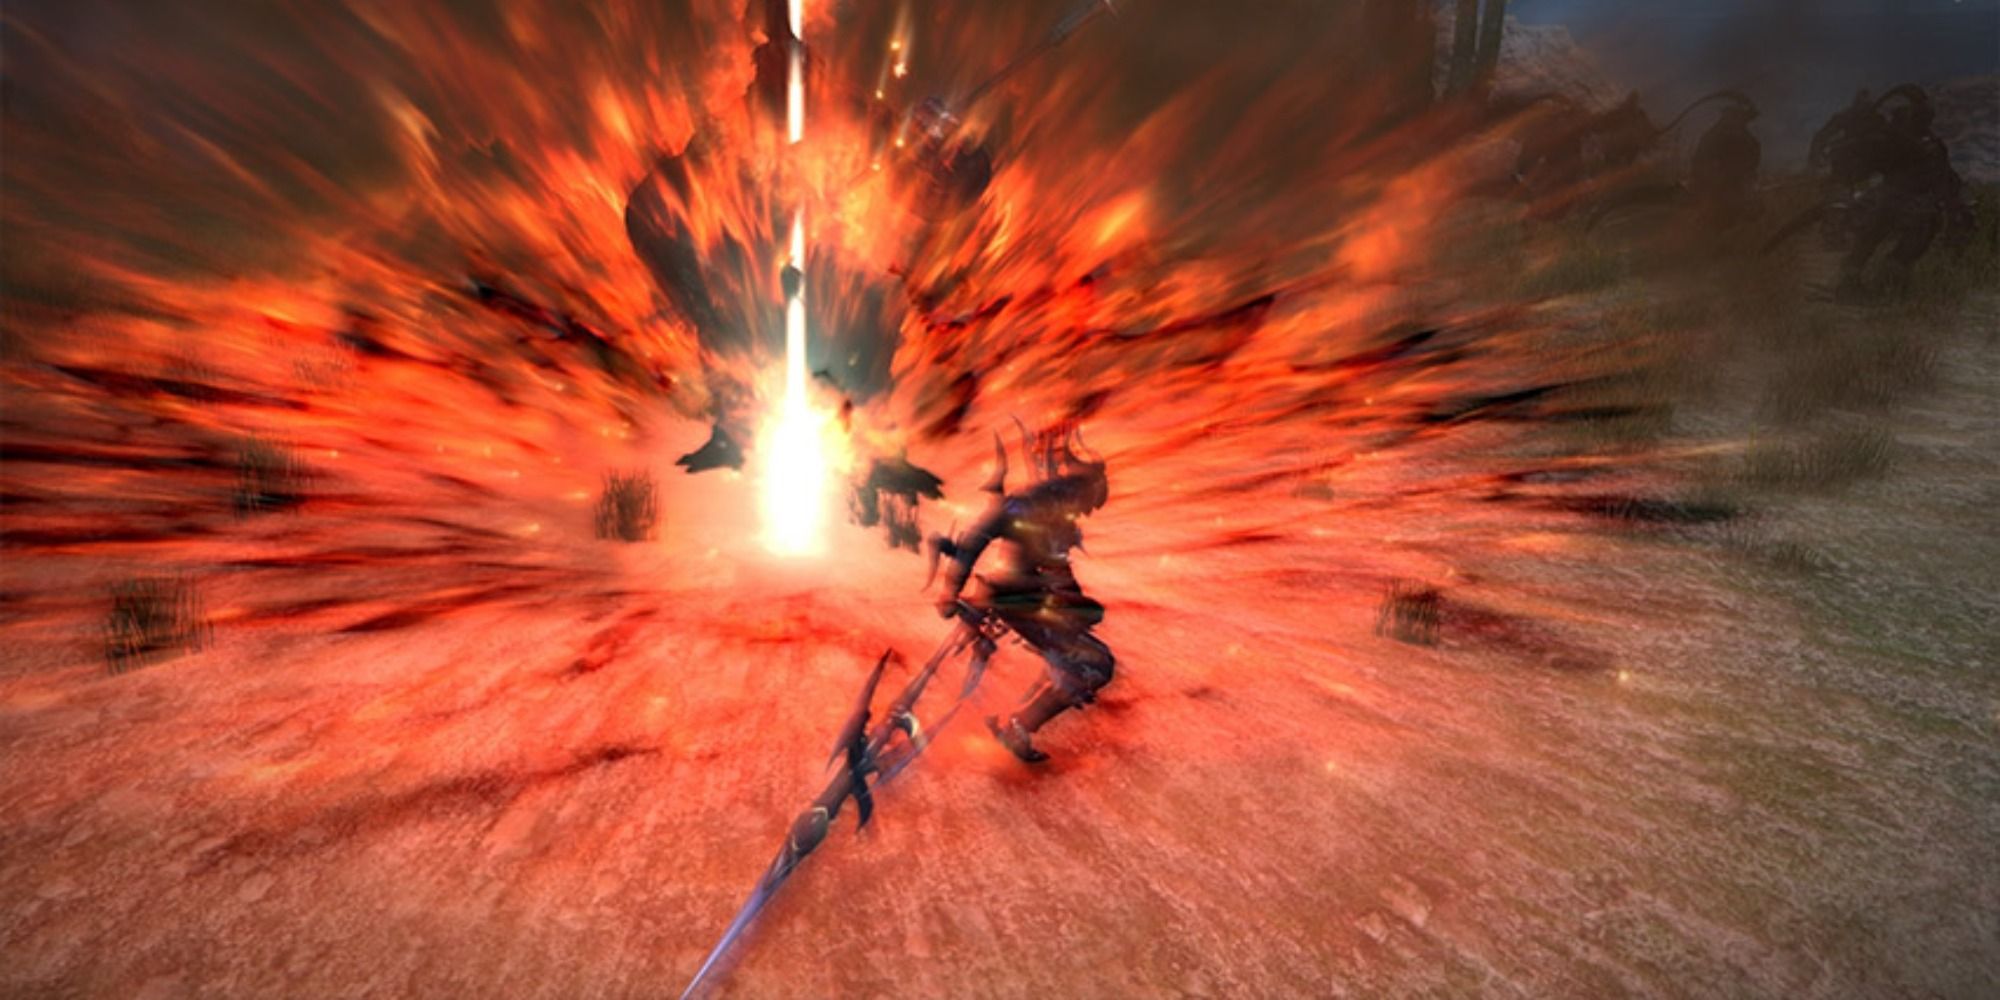 A Jumping Attack from a Dragoon in Final Fantasy 14